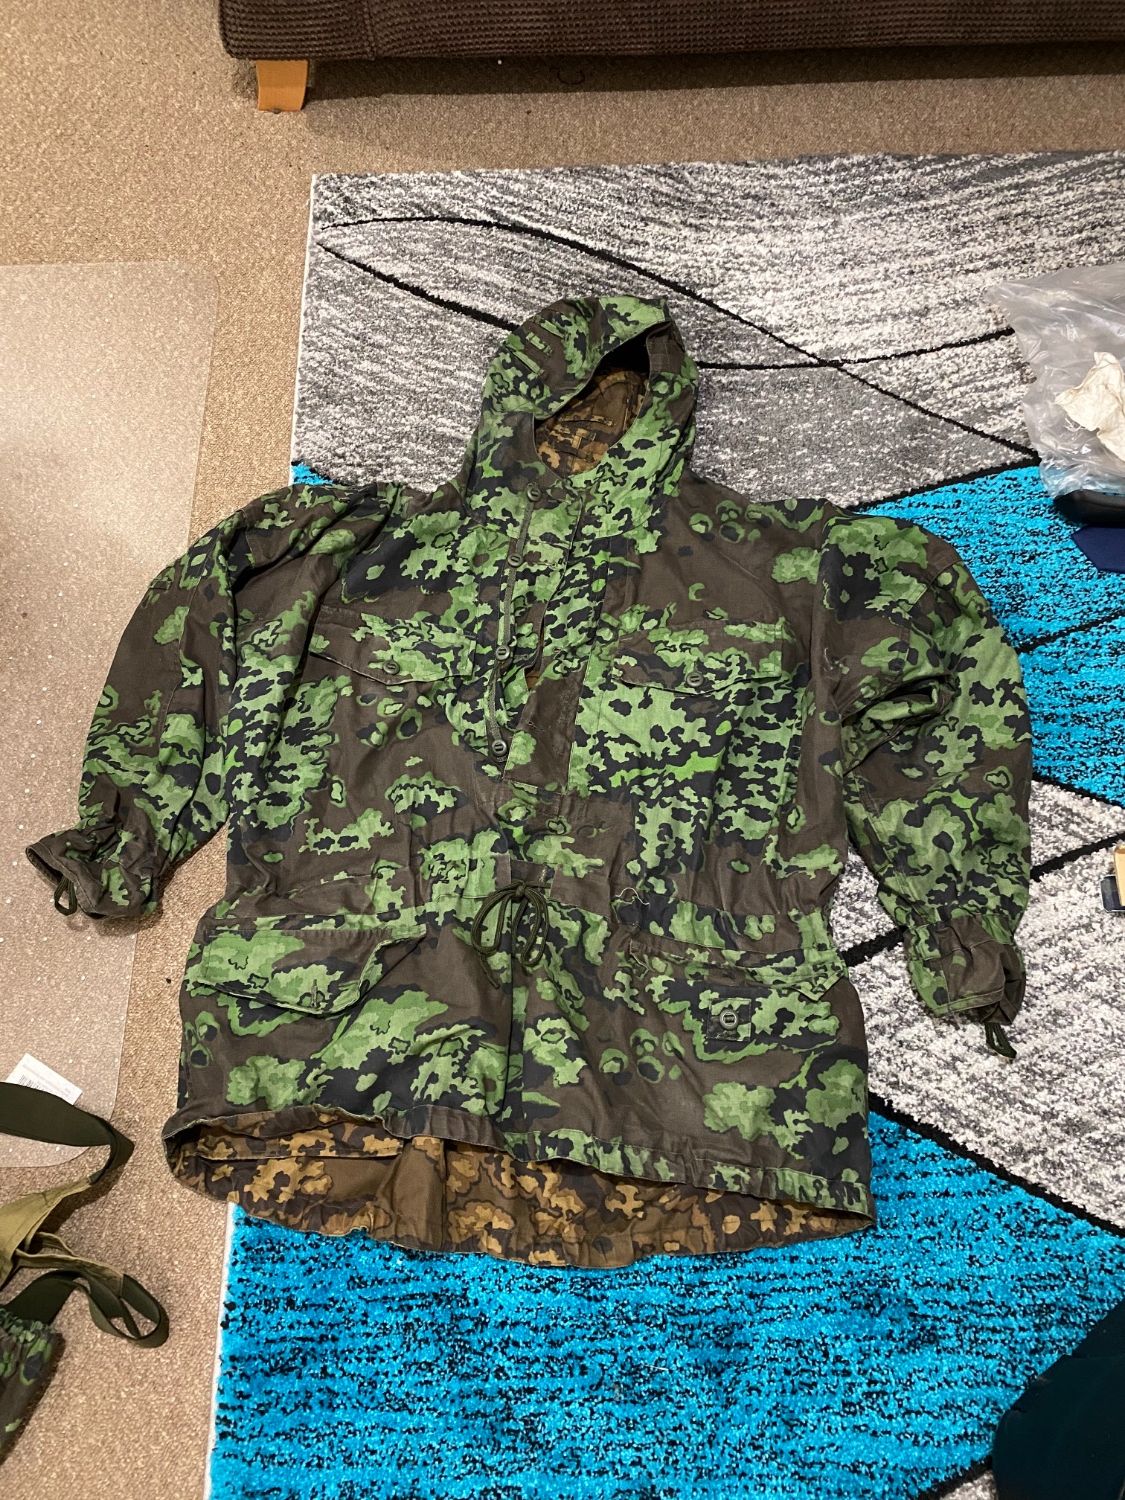 Russian reversible camo gorka with braces - Gear - Airsoft Forums UK